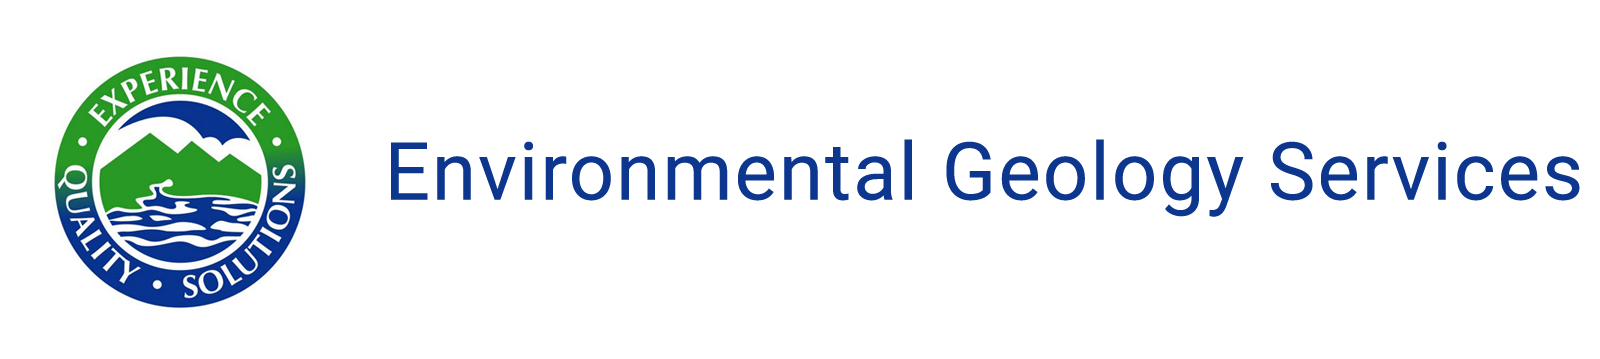 Environmental Geology Services